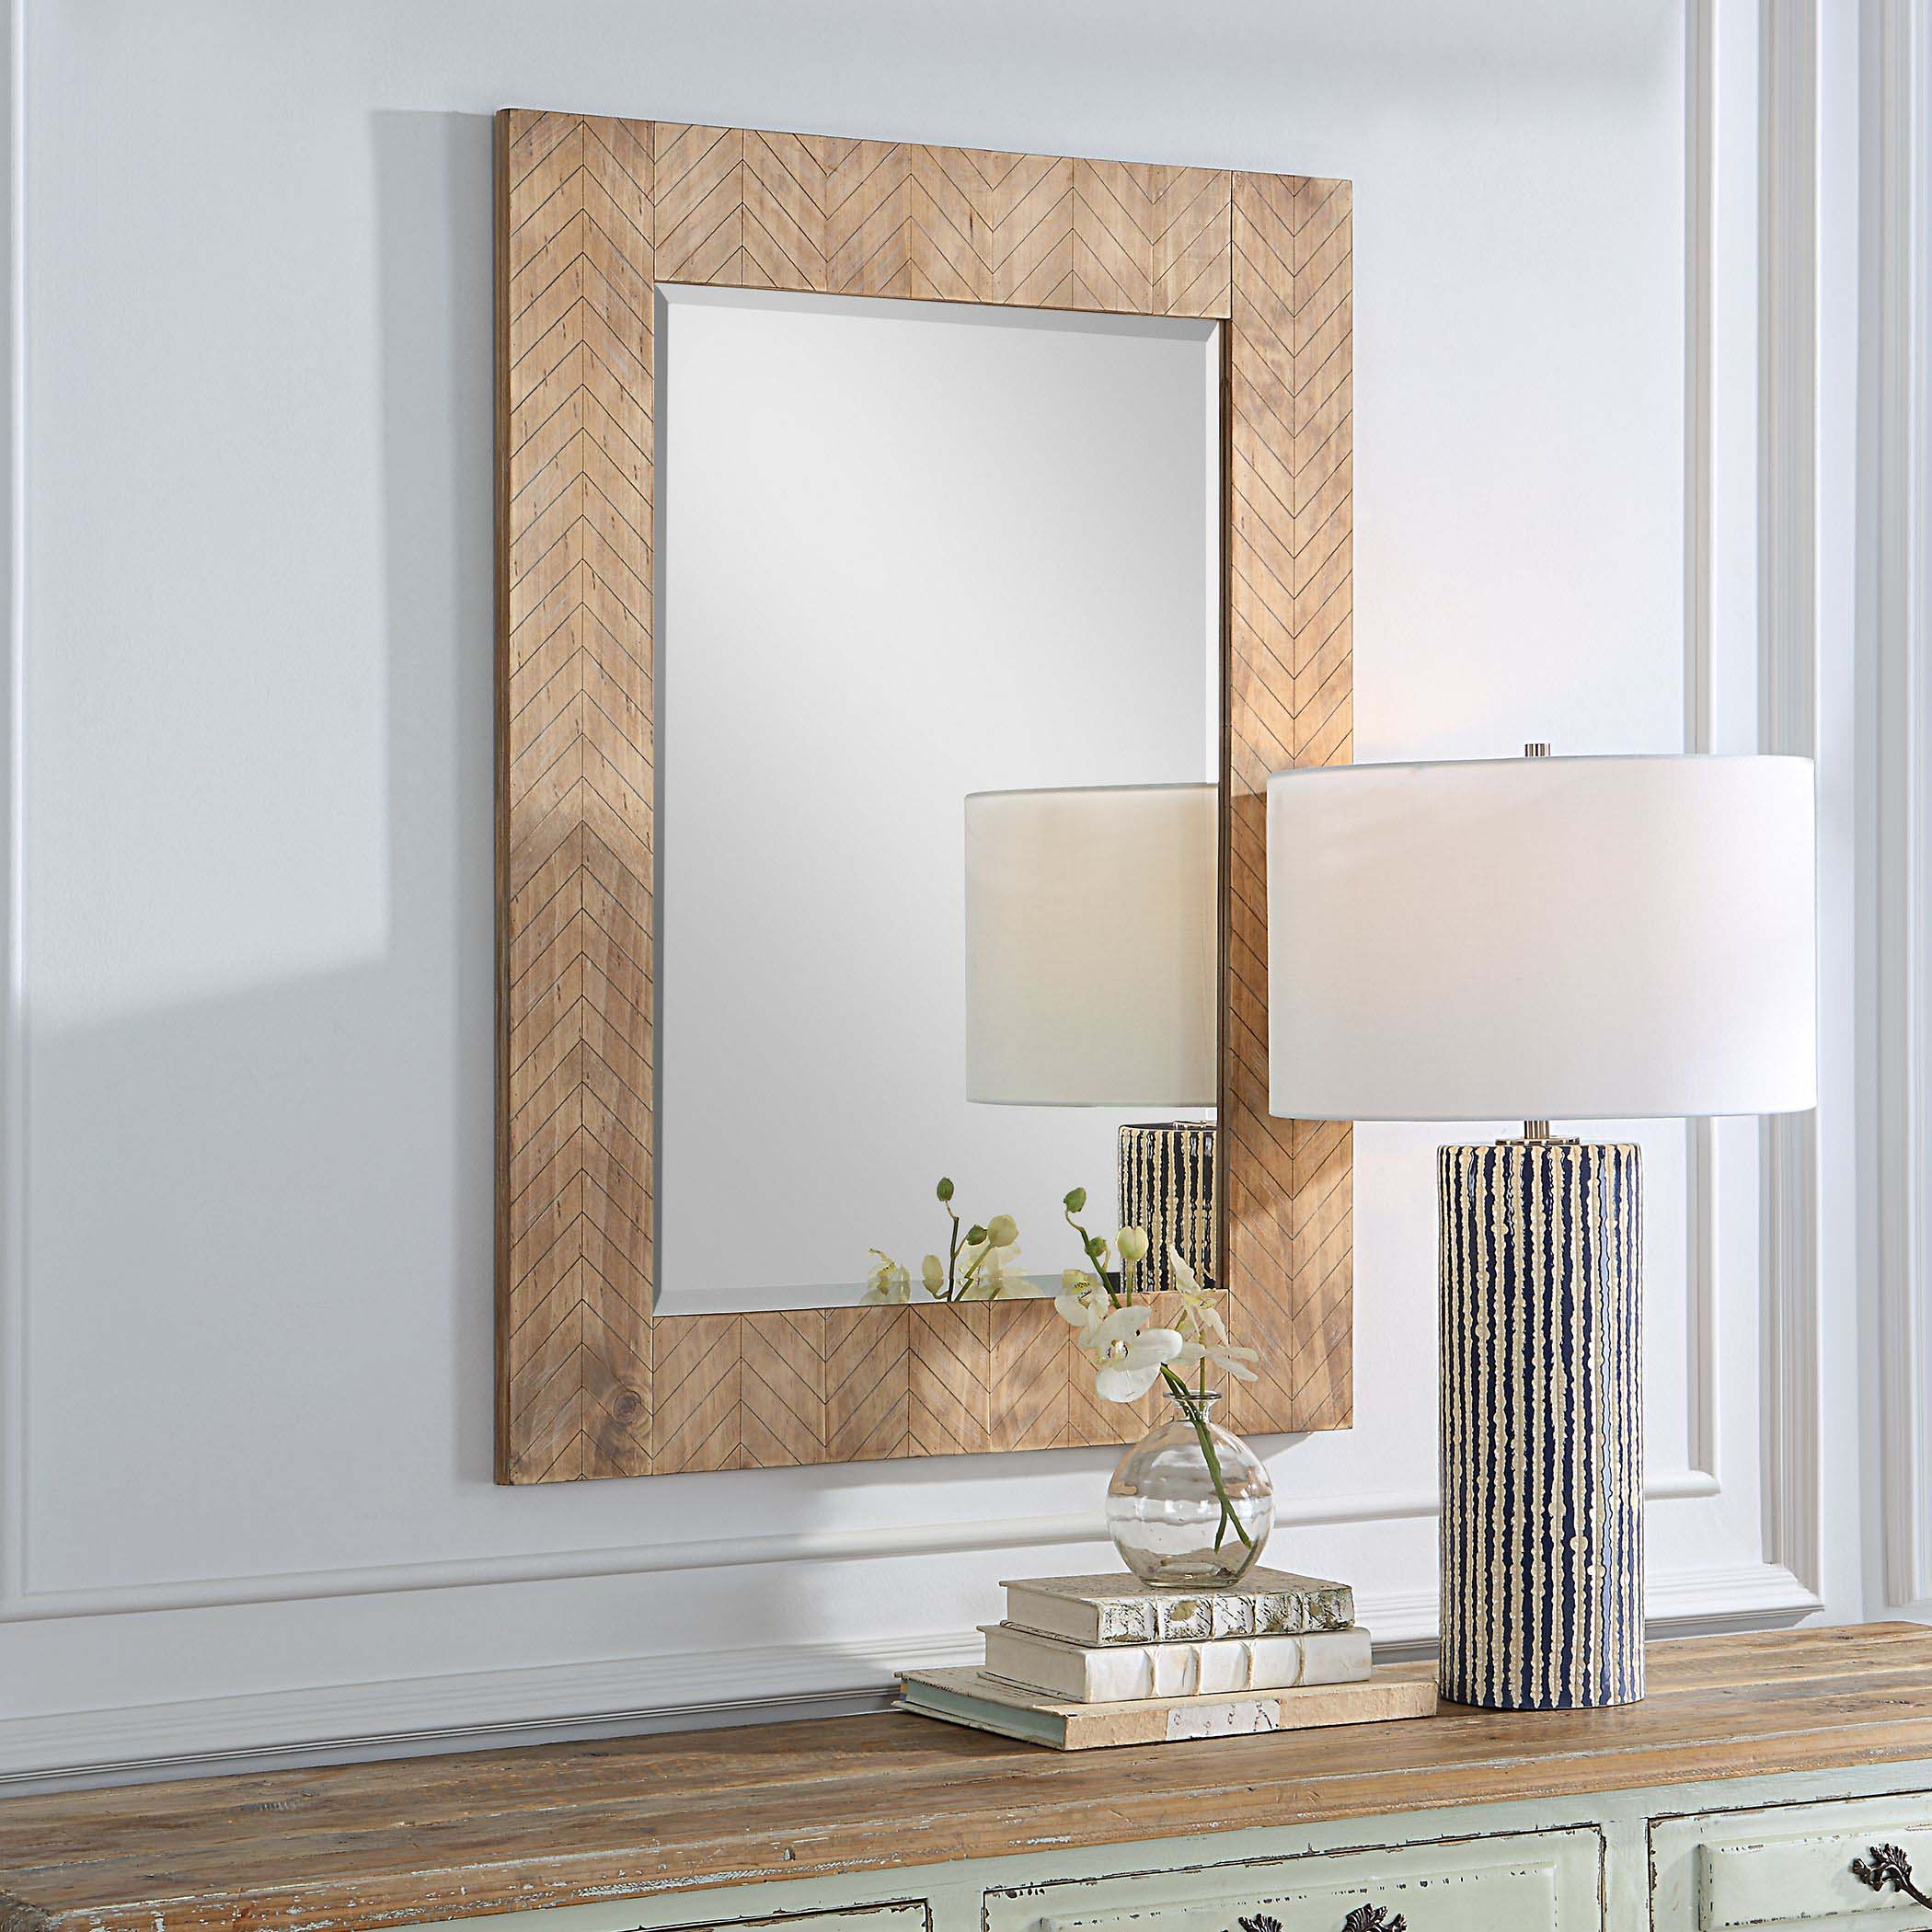 Decor Market Mirror - Chevron Pattern Designed In A Natural Solid Wood